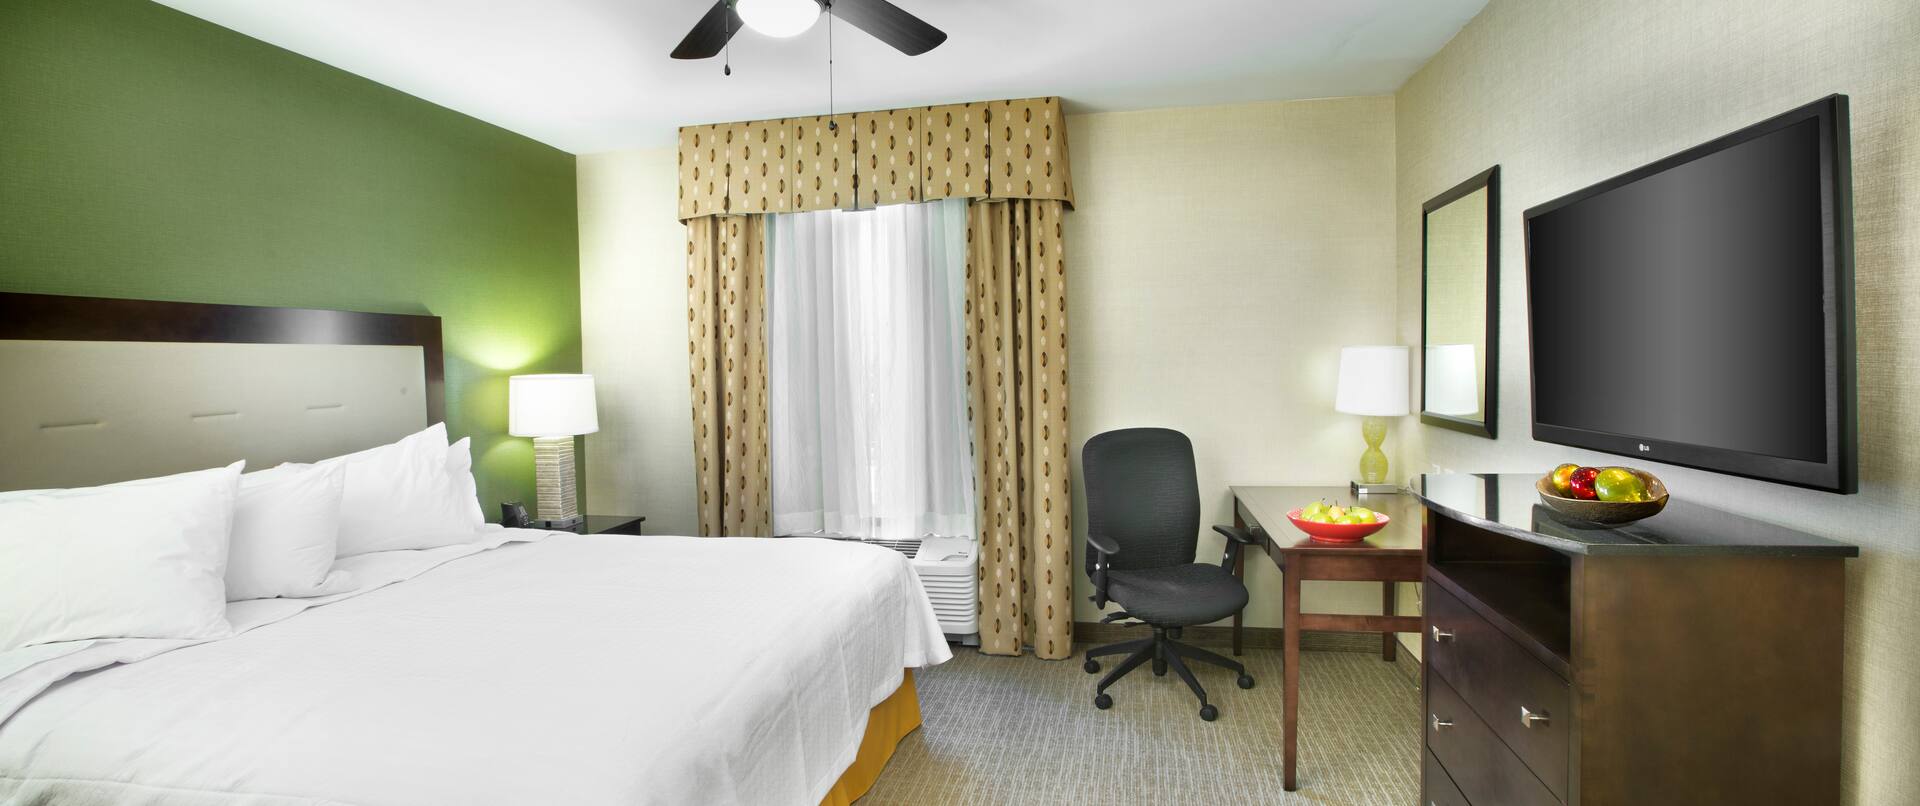 King Bed and Bedside Table With Lamp, Ceiling Fan, Work Desk by Window, and TV in Suite Guest Room